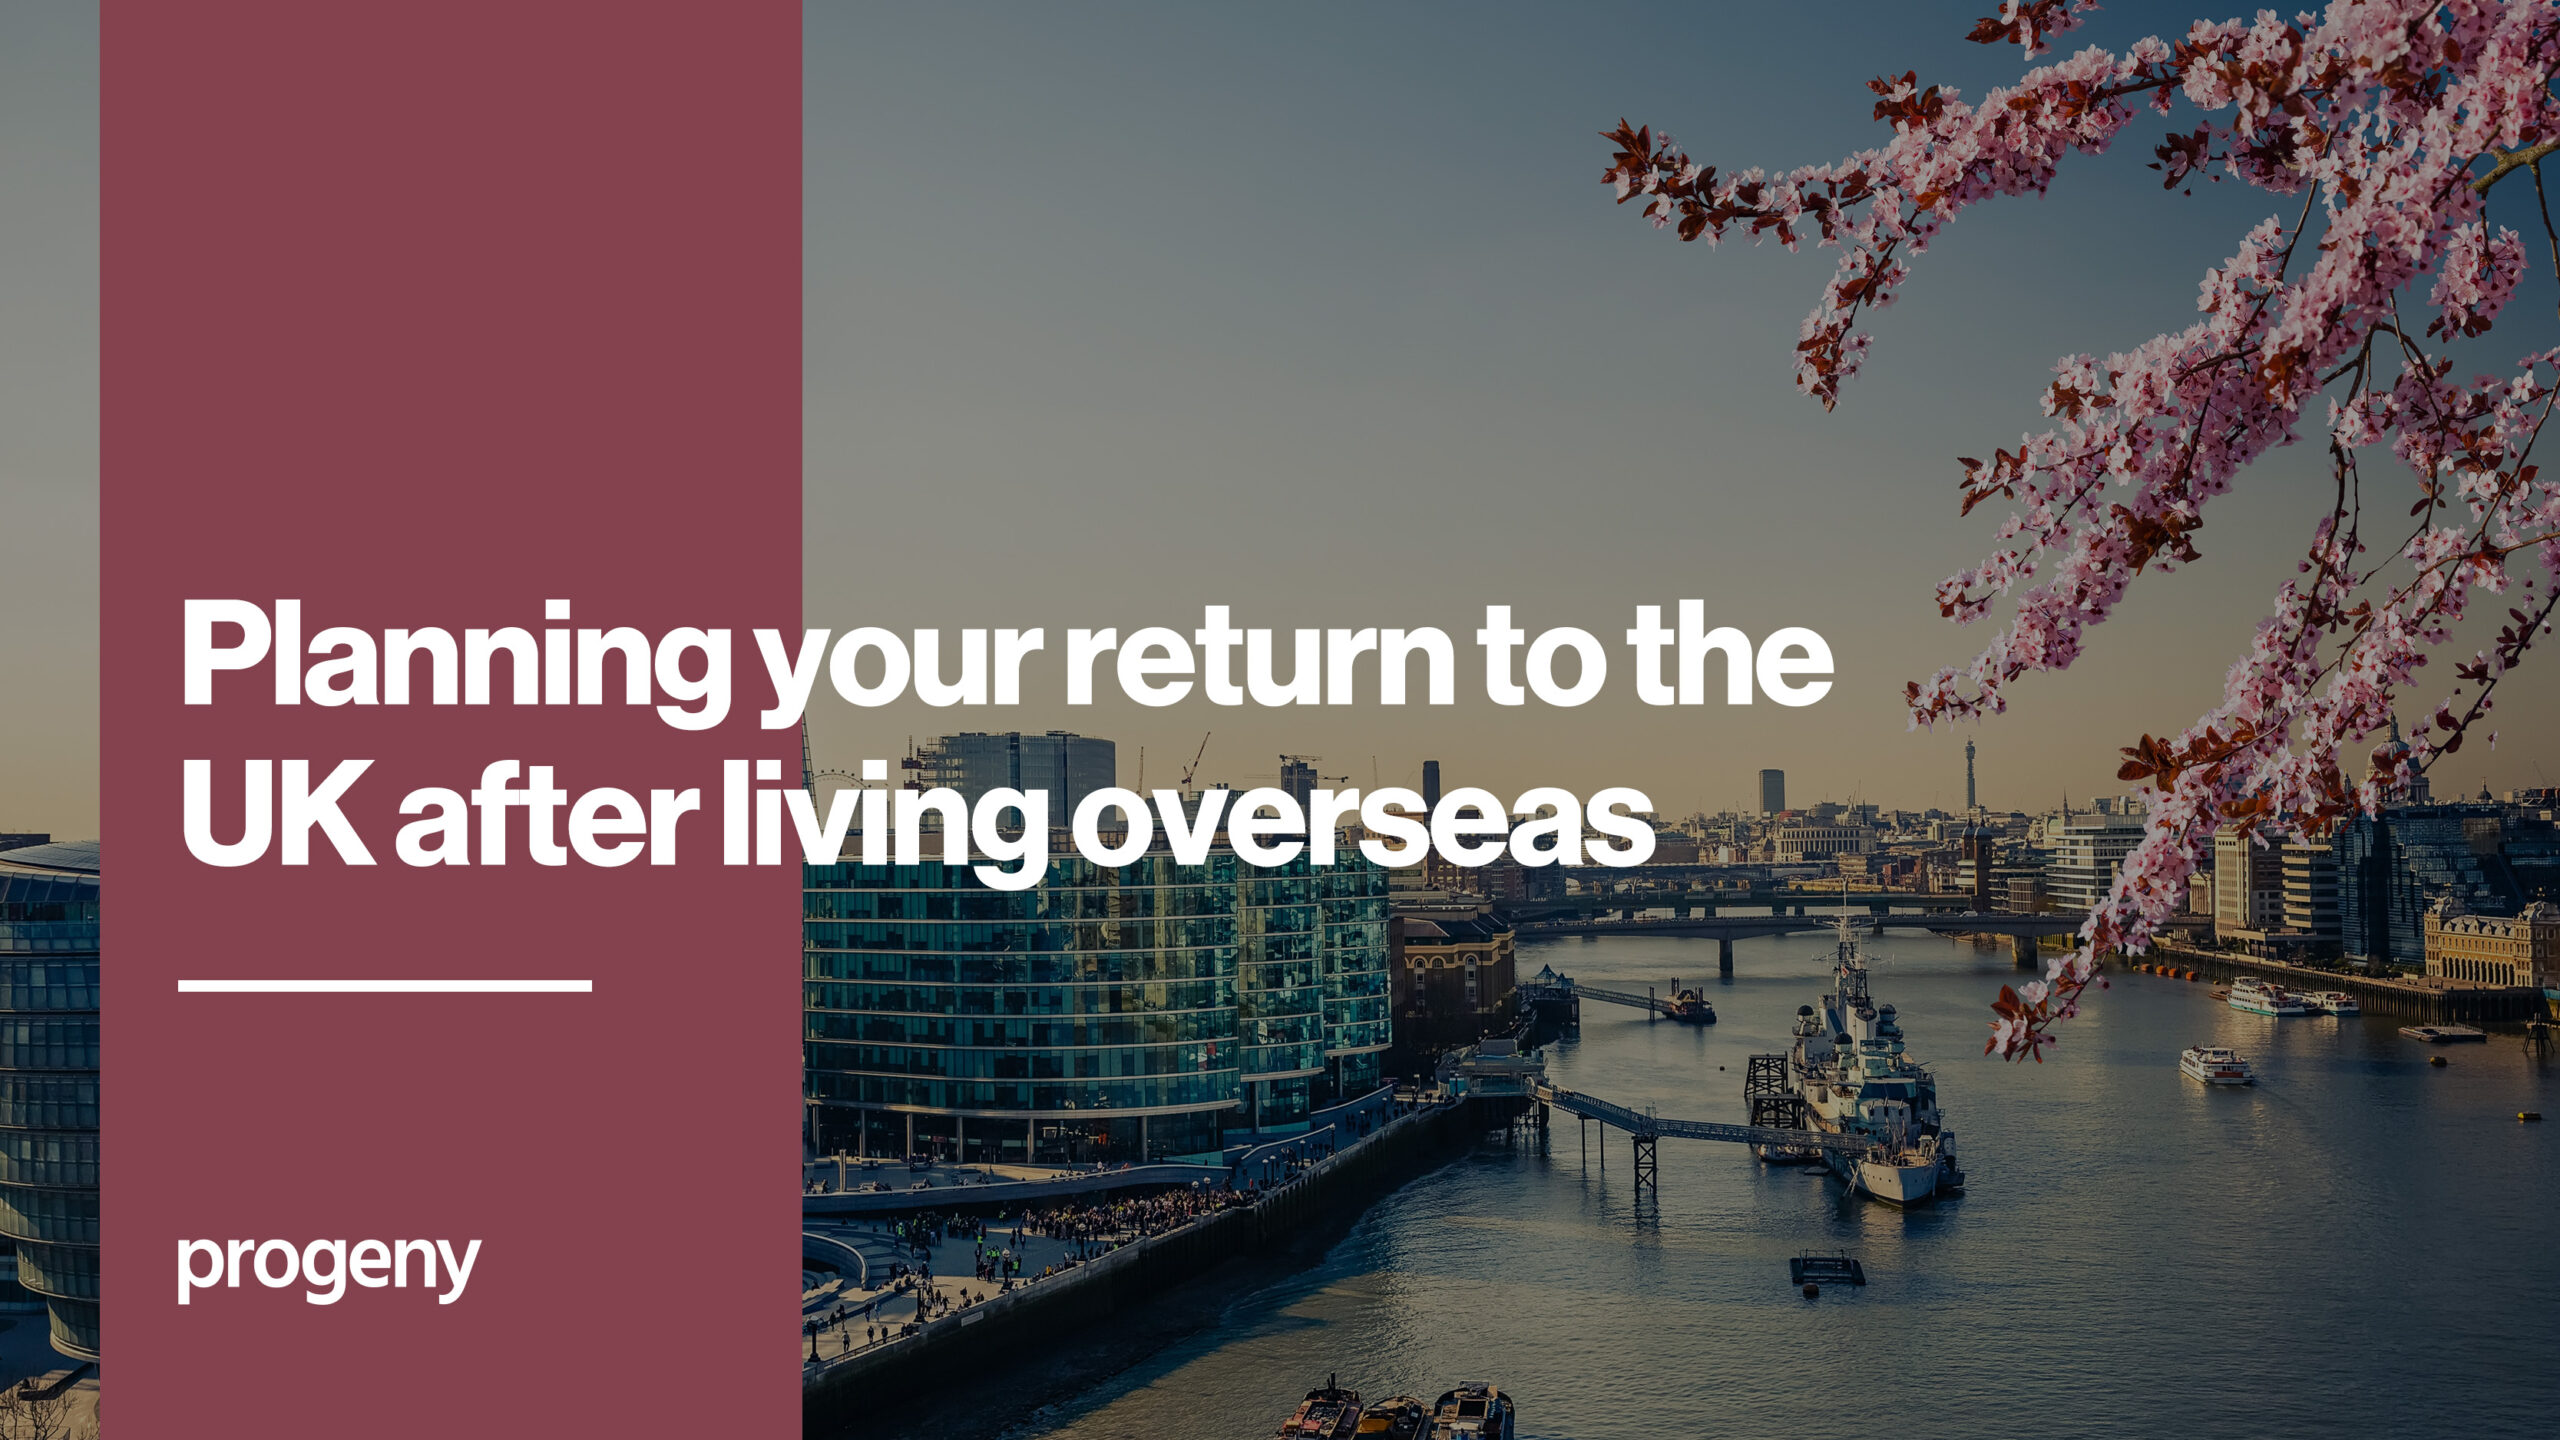 Planning your return to the UK after living overseas